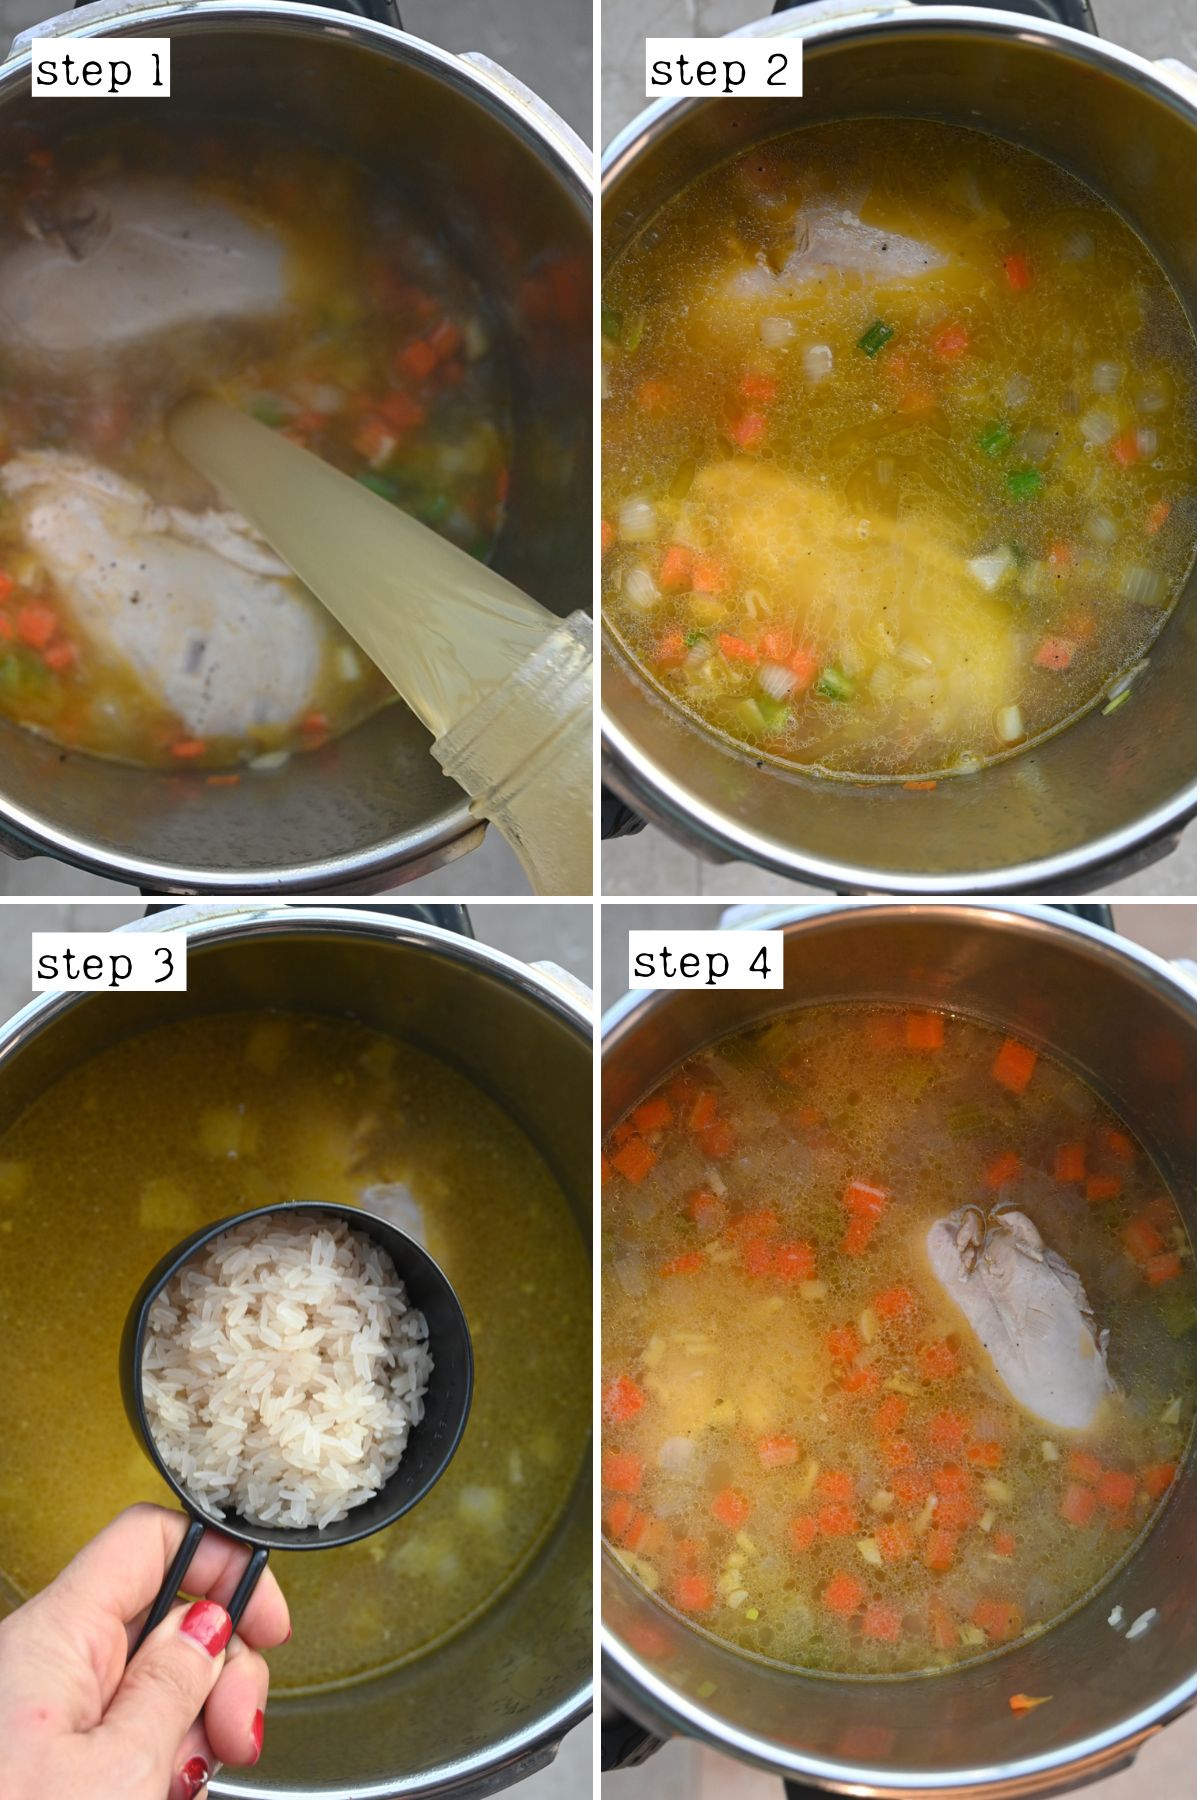 Steps for making chicken and rice soup